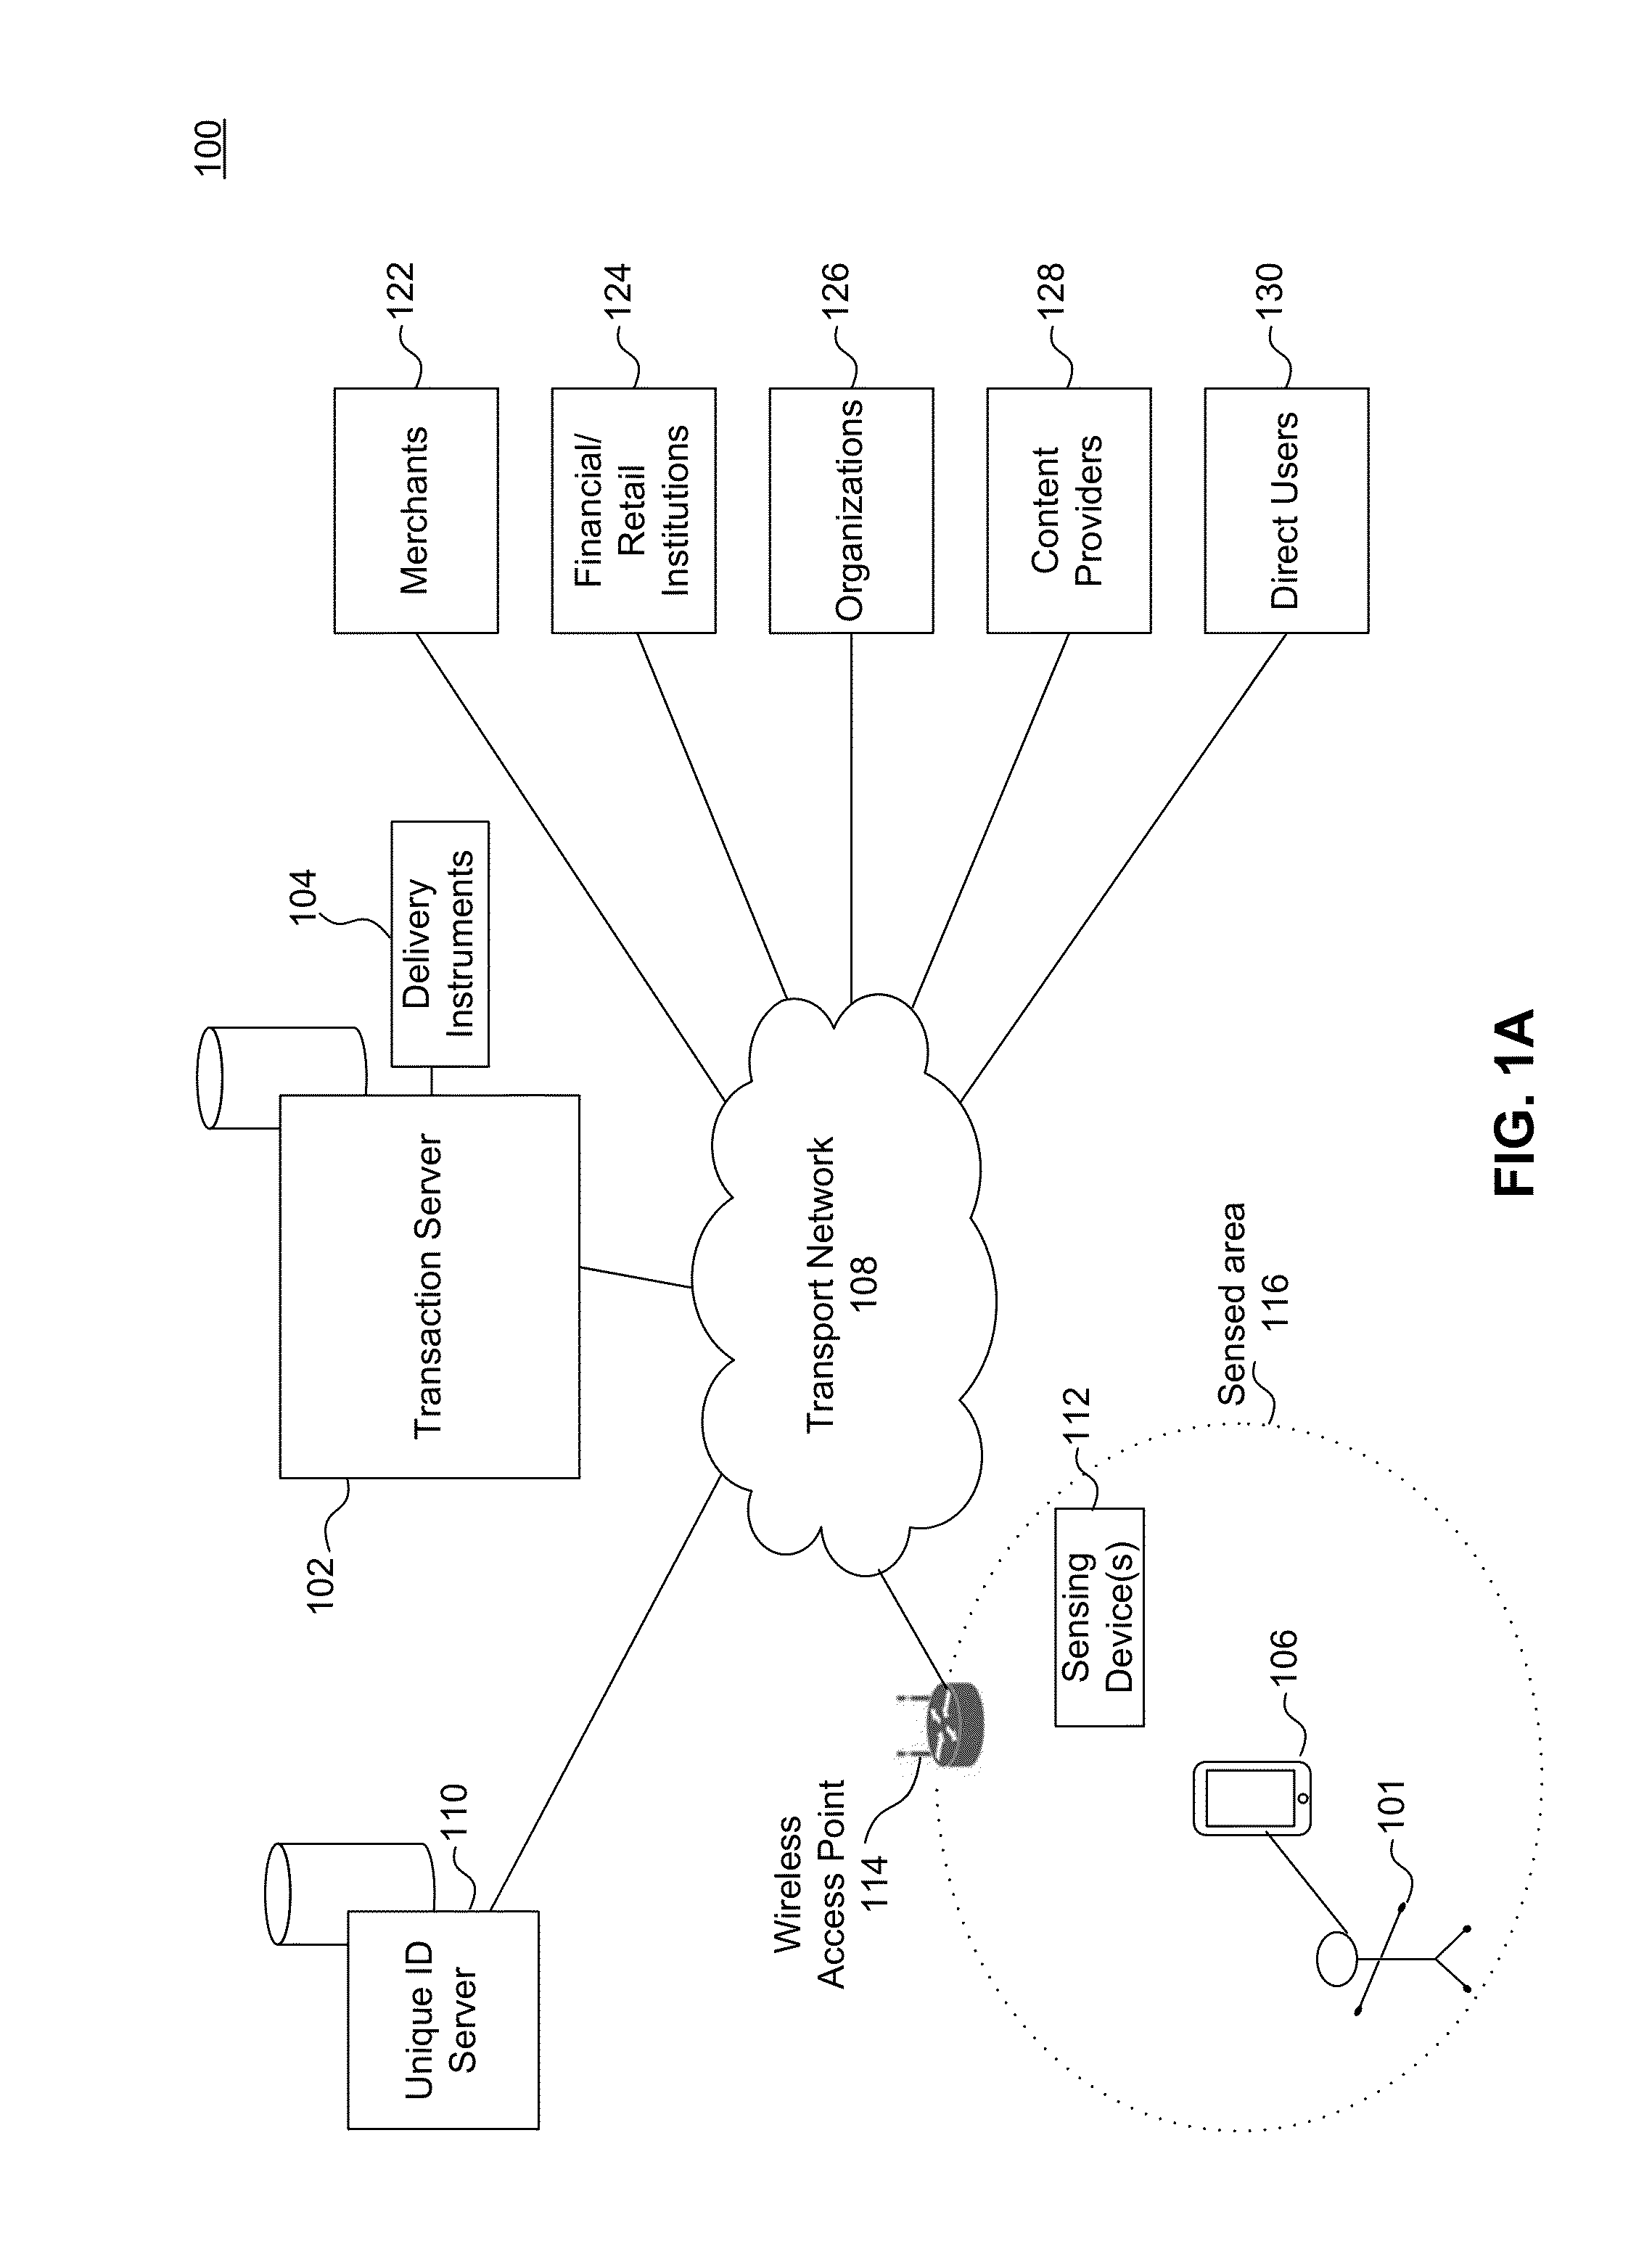 Electronic Commerce System